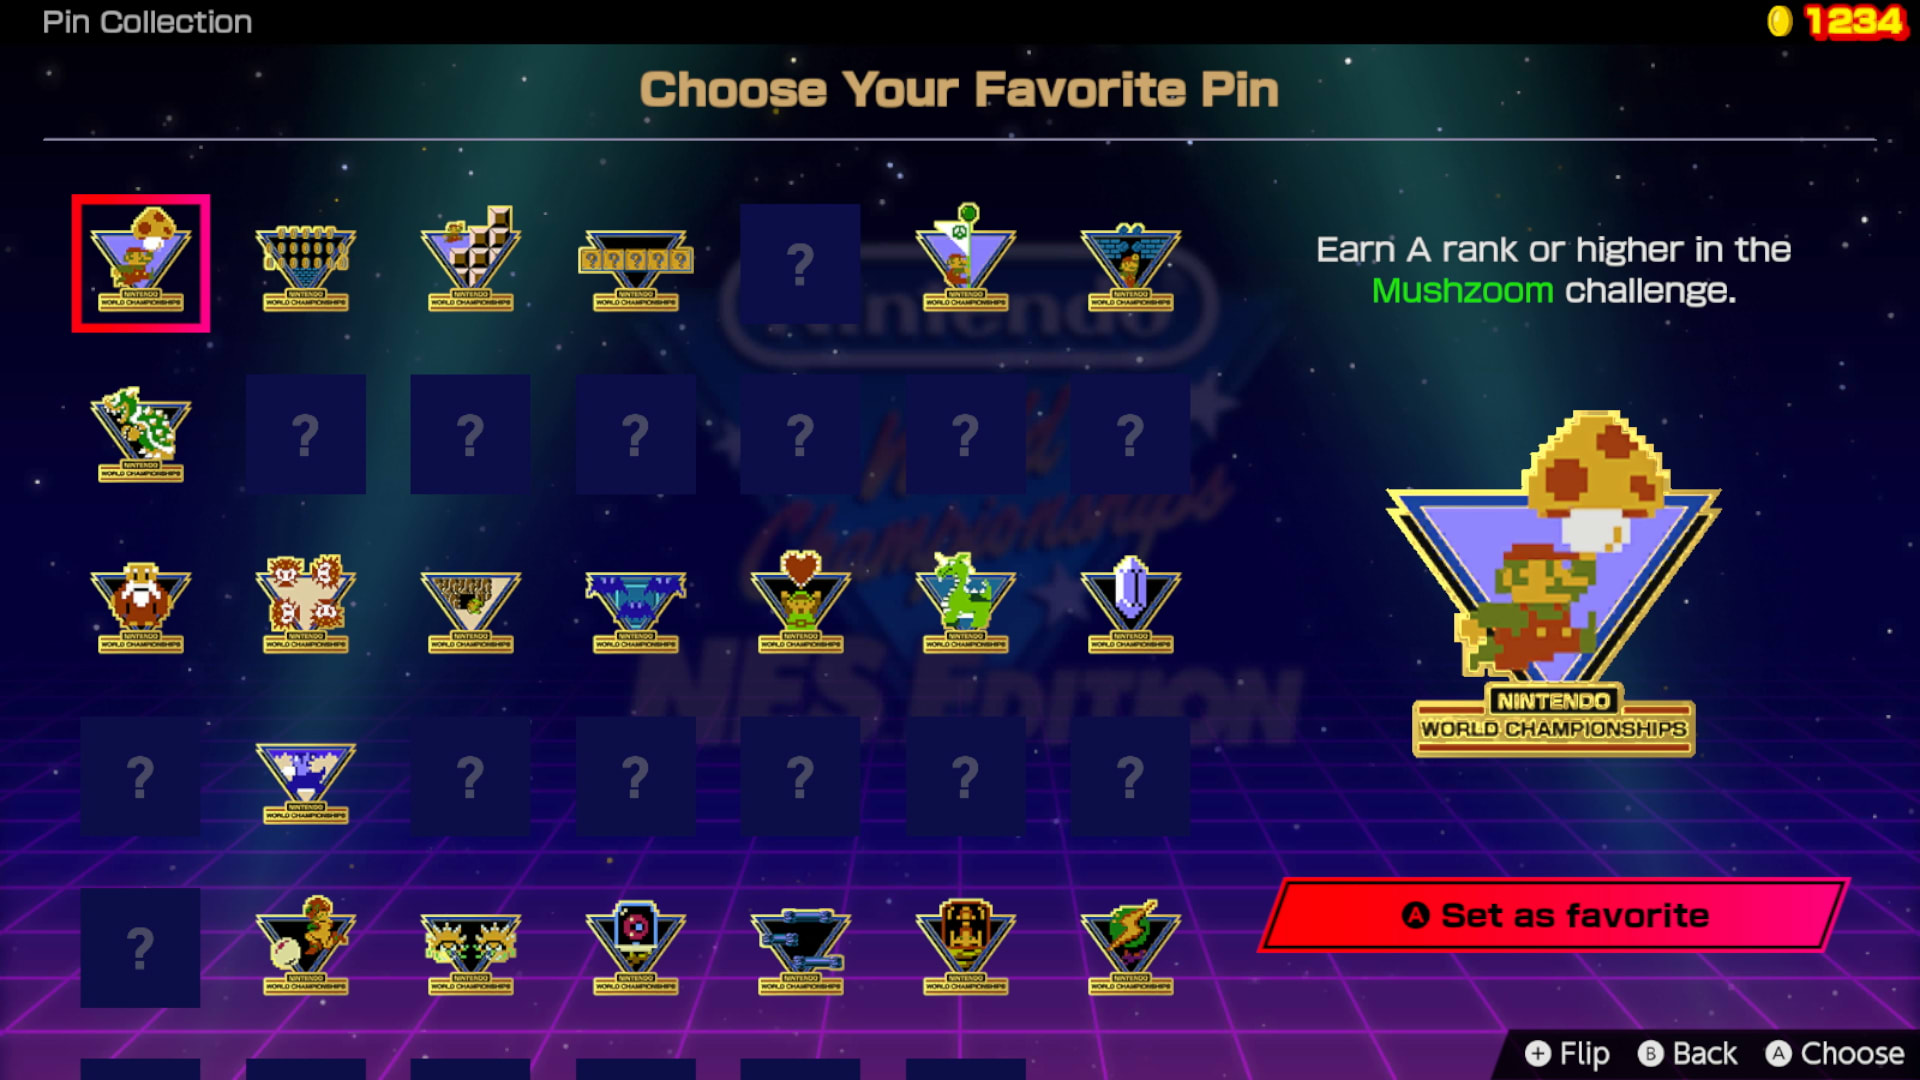 A menu shows available and unavailable in-game pins. The selected pin was awarded by earning an A rank or higher in the Mushzoom challenge.